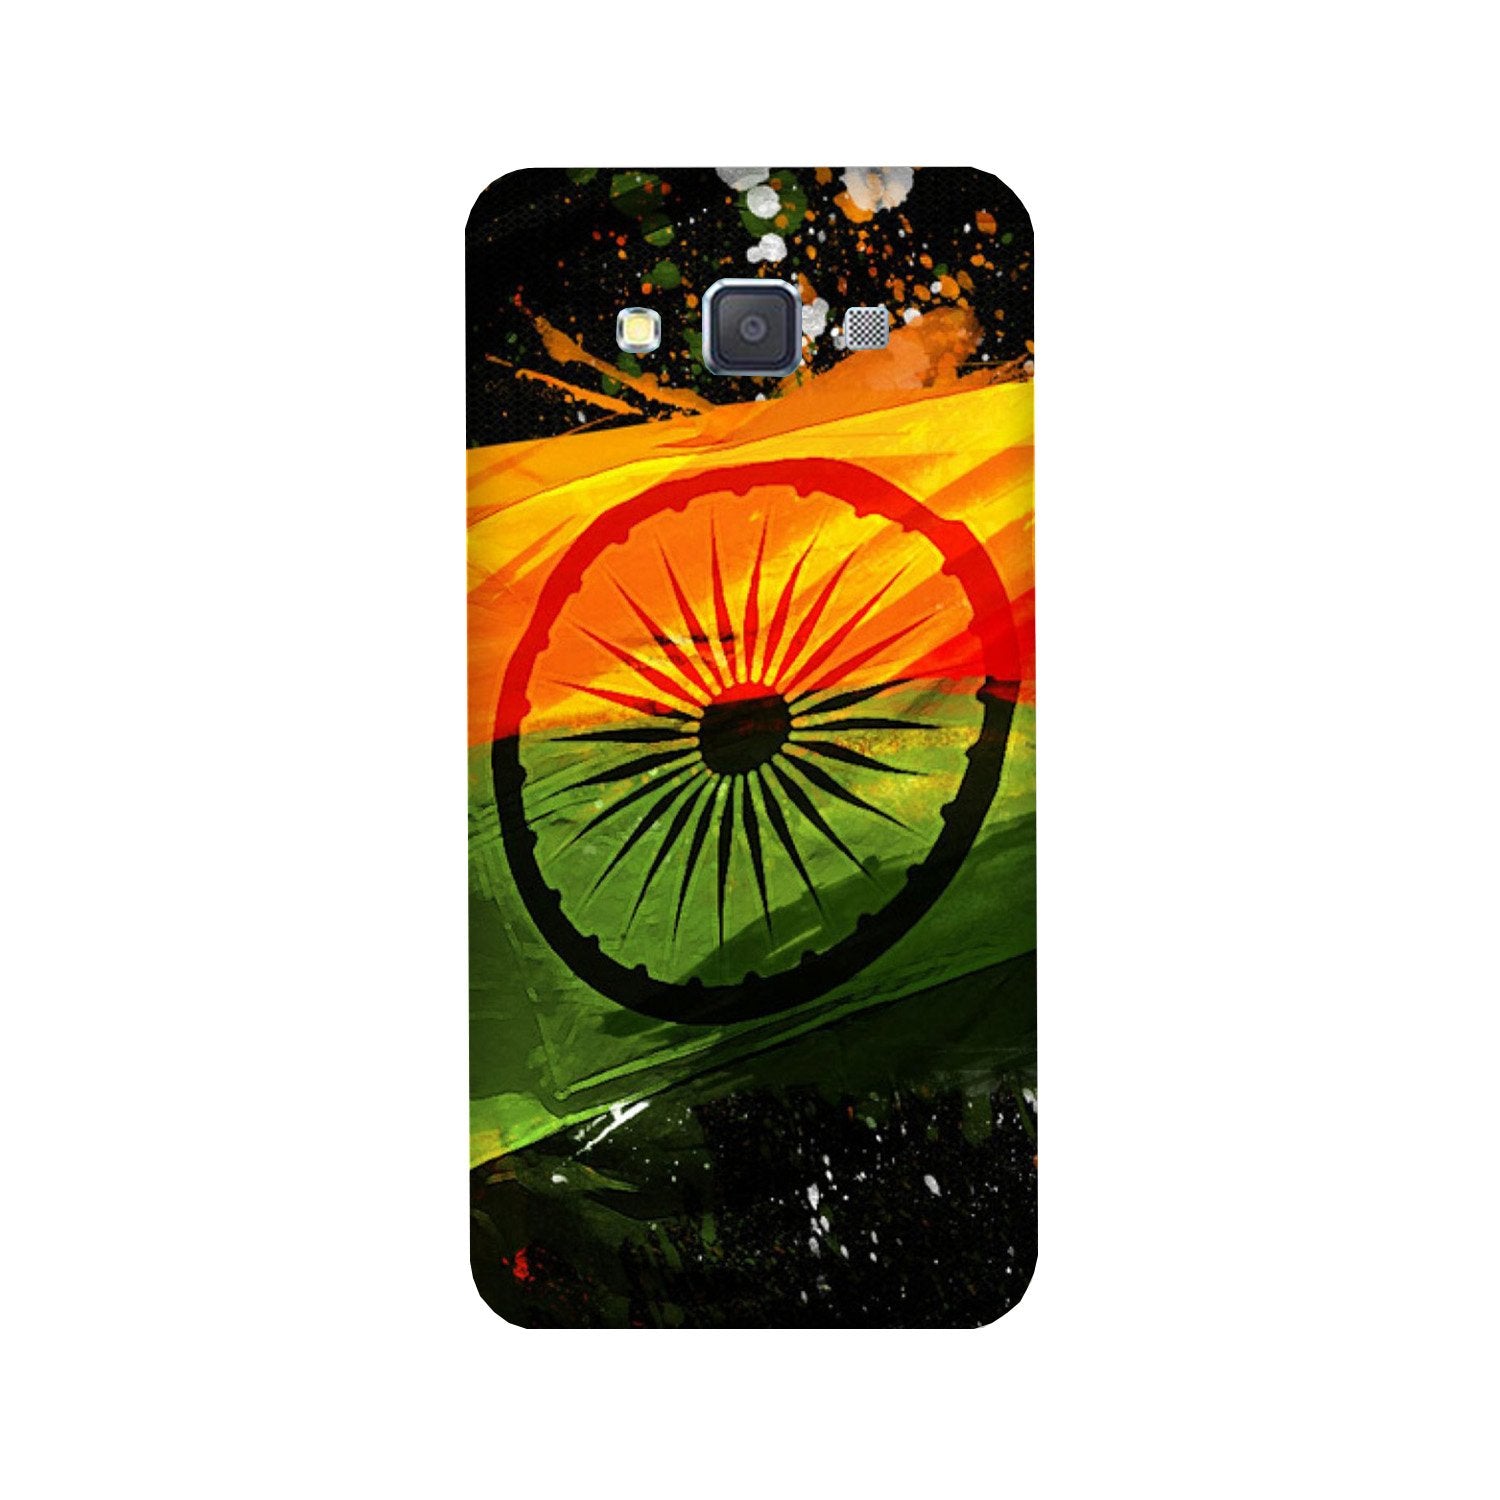 Indian Flag Case for Galaxy Grand Prime(Design - 137)